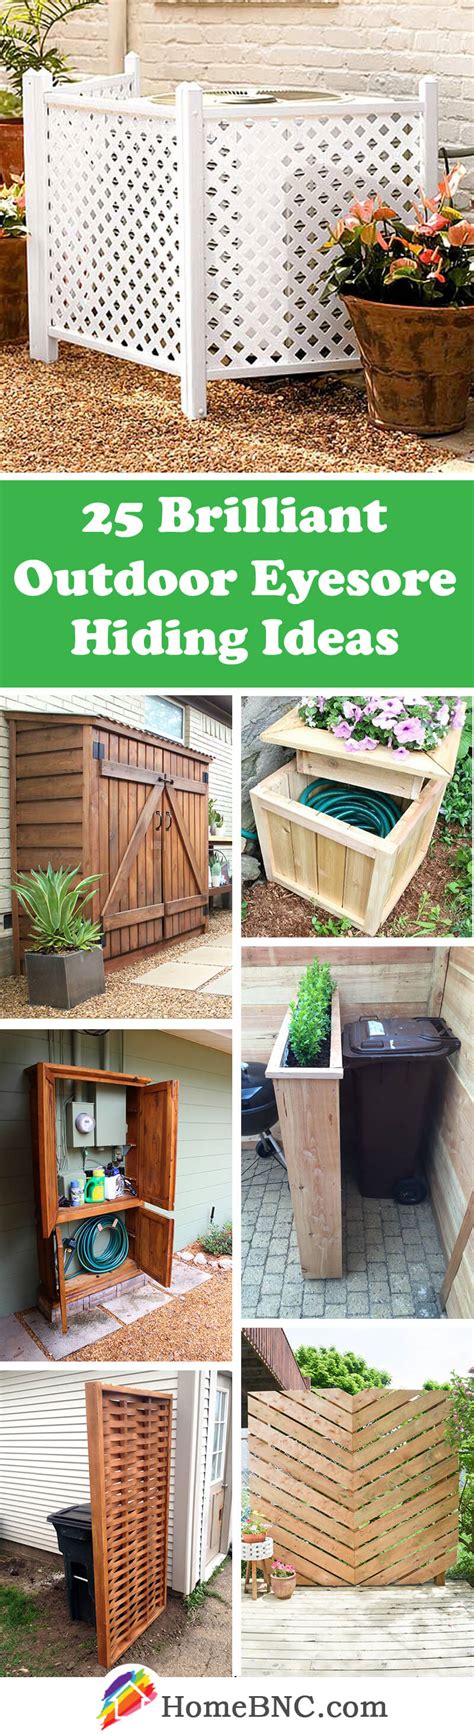 25 Best Outdoor Eyesore Hiding Ideas And Designs For 2017